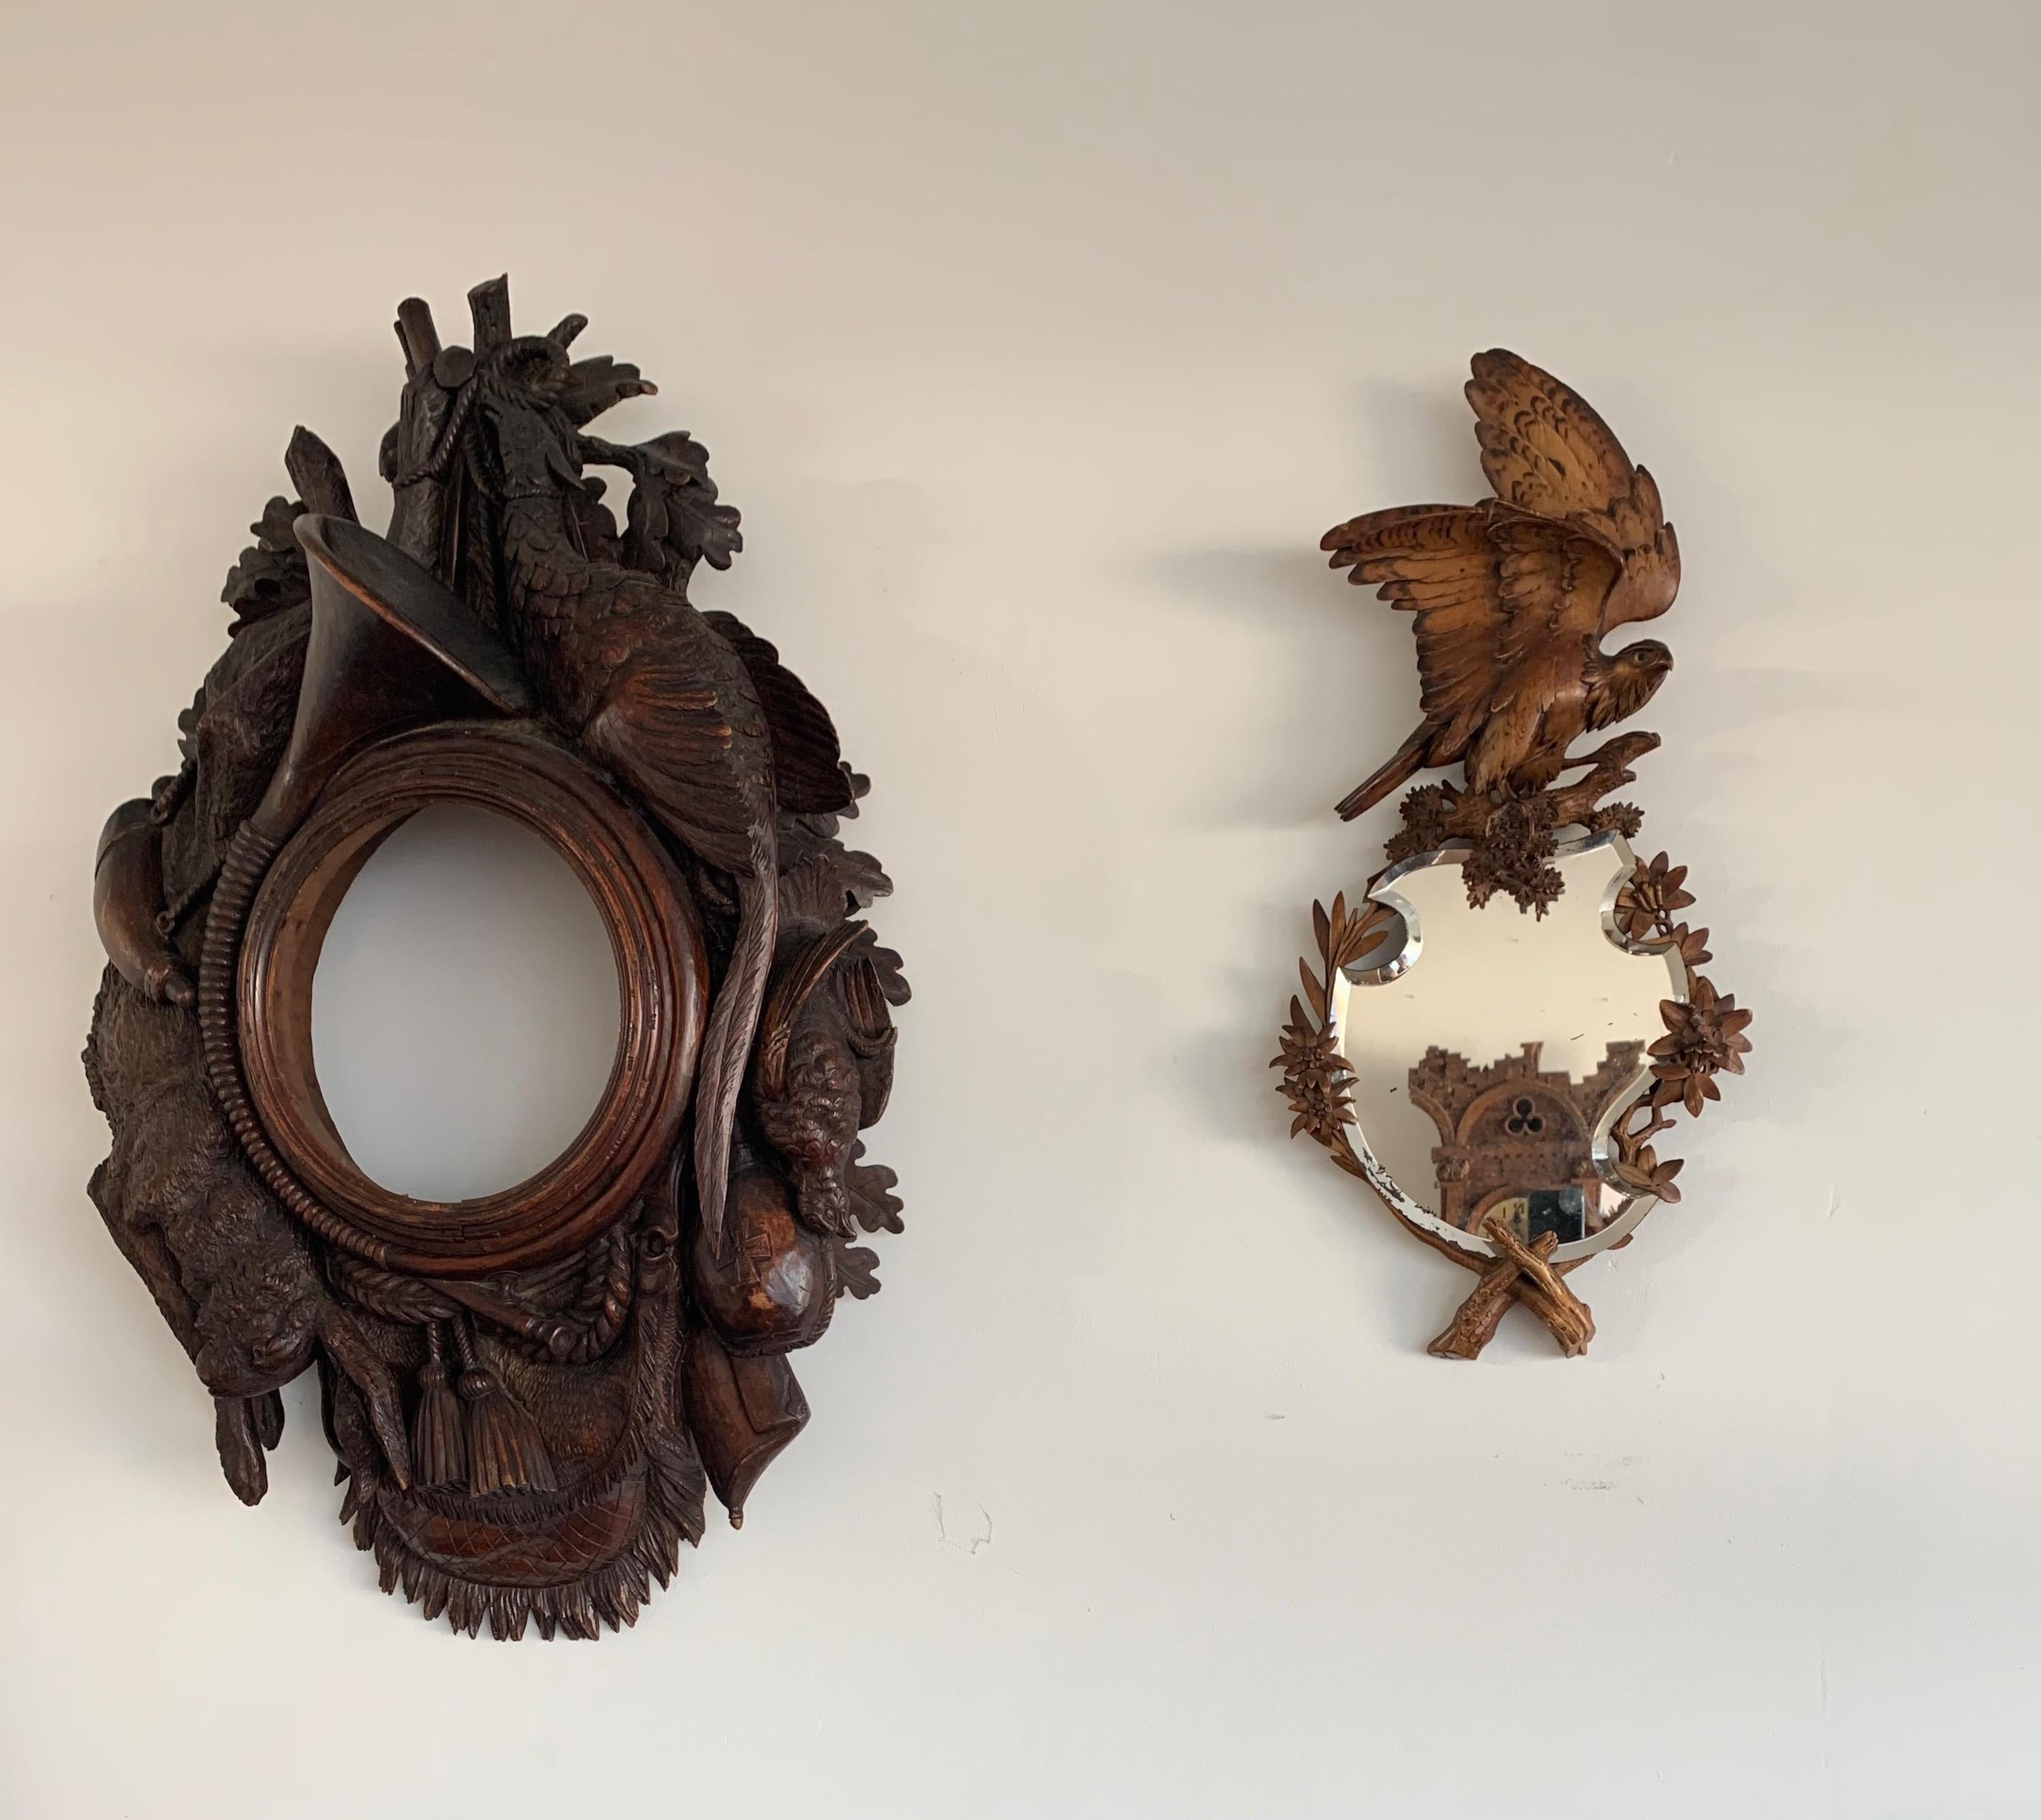 Antique & Quality Carved Black Forest Wall Mirror w. Carved Eagle Sculpture Atop 14